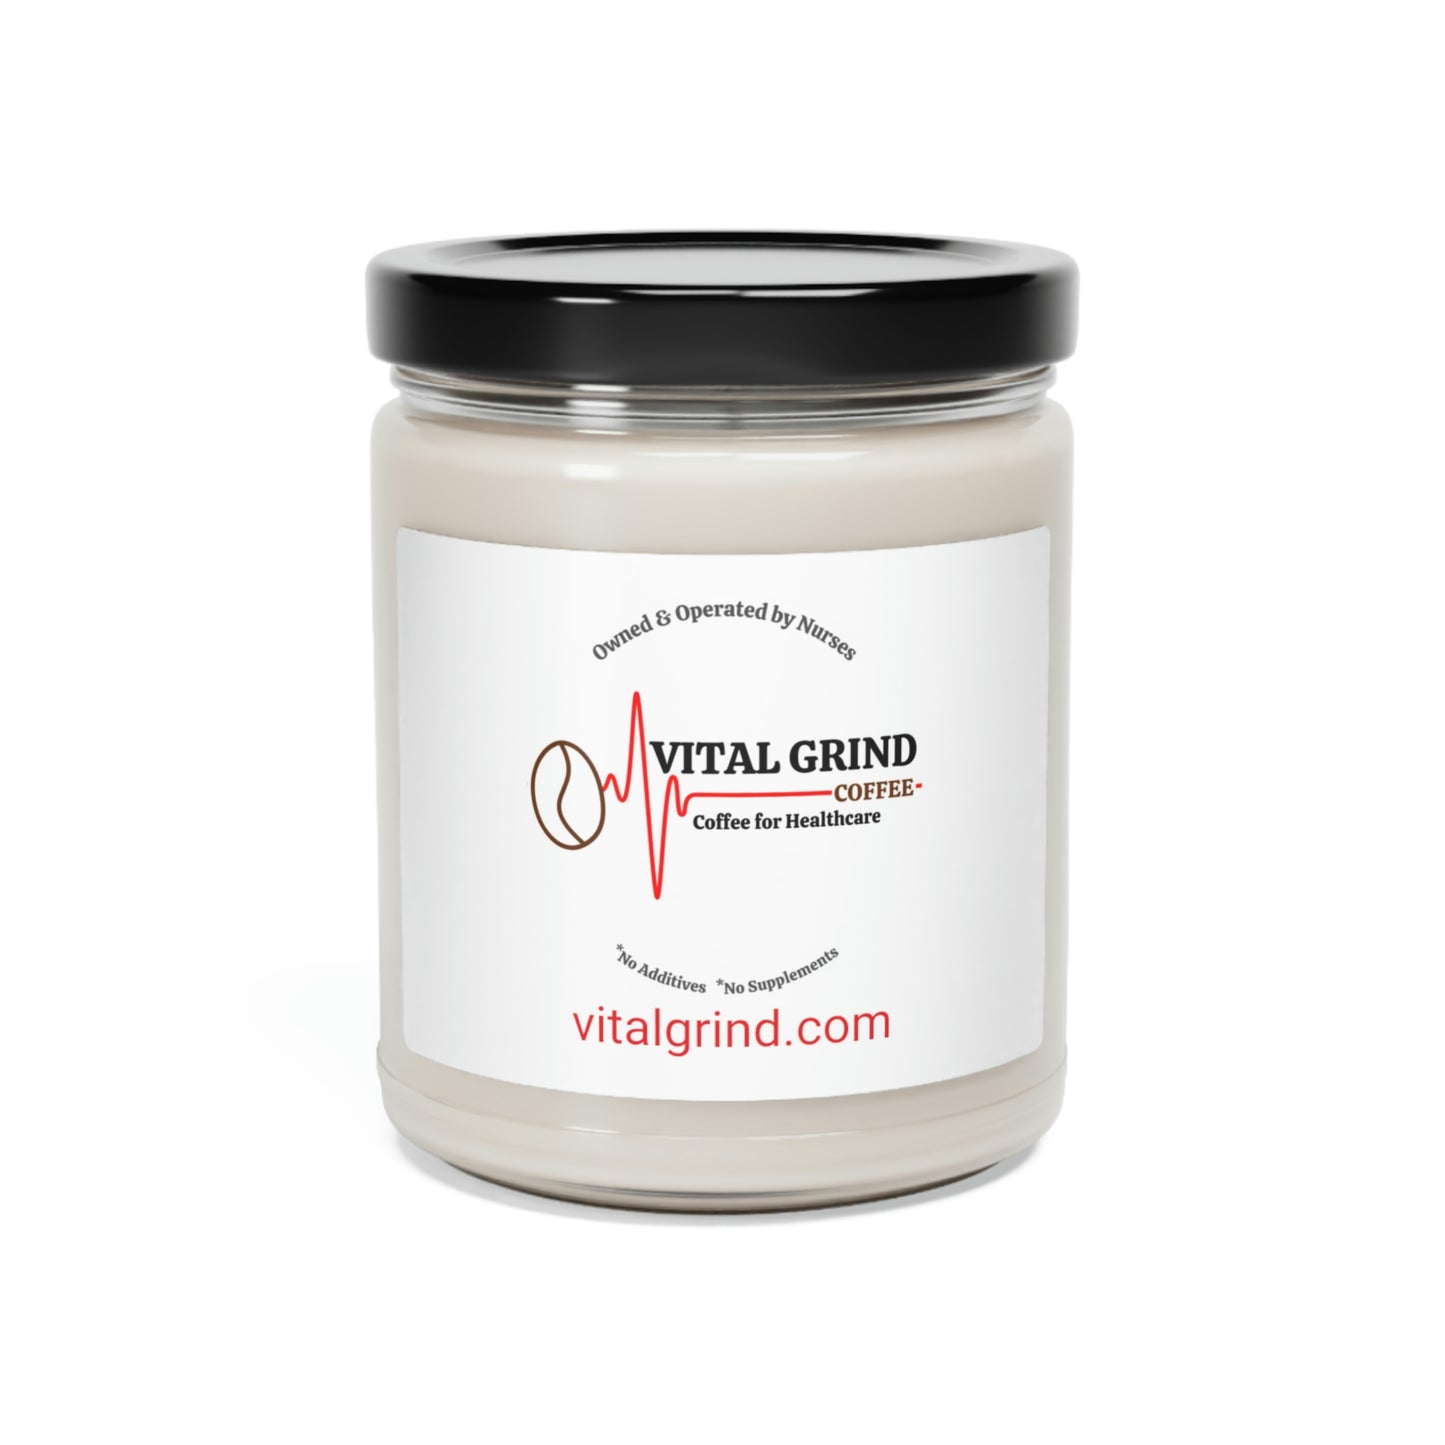 Vital Grind Scented Soy Candle, 9oz